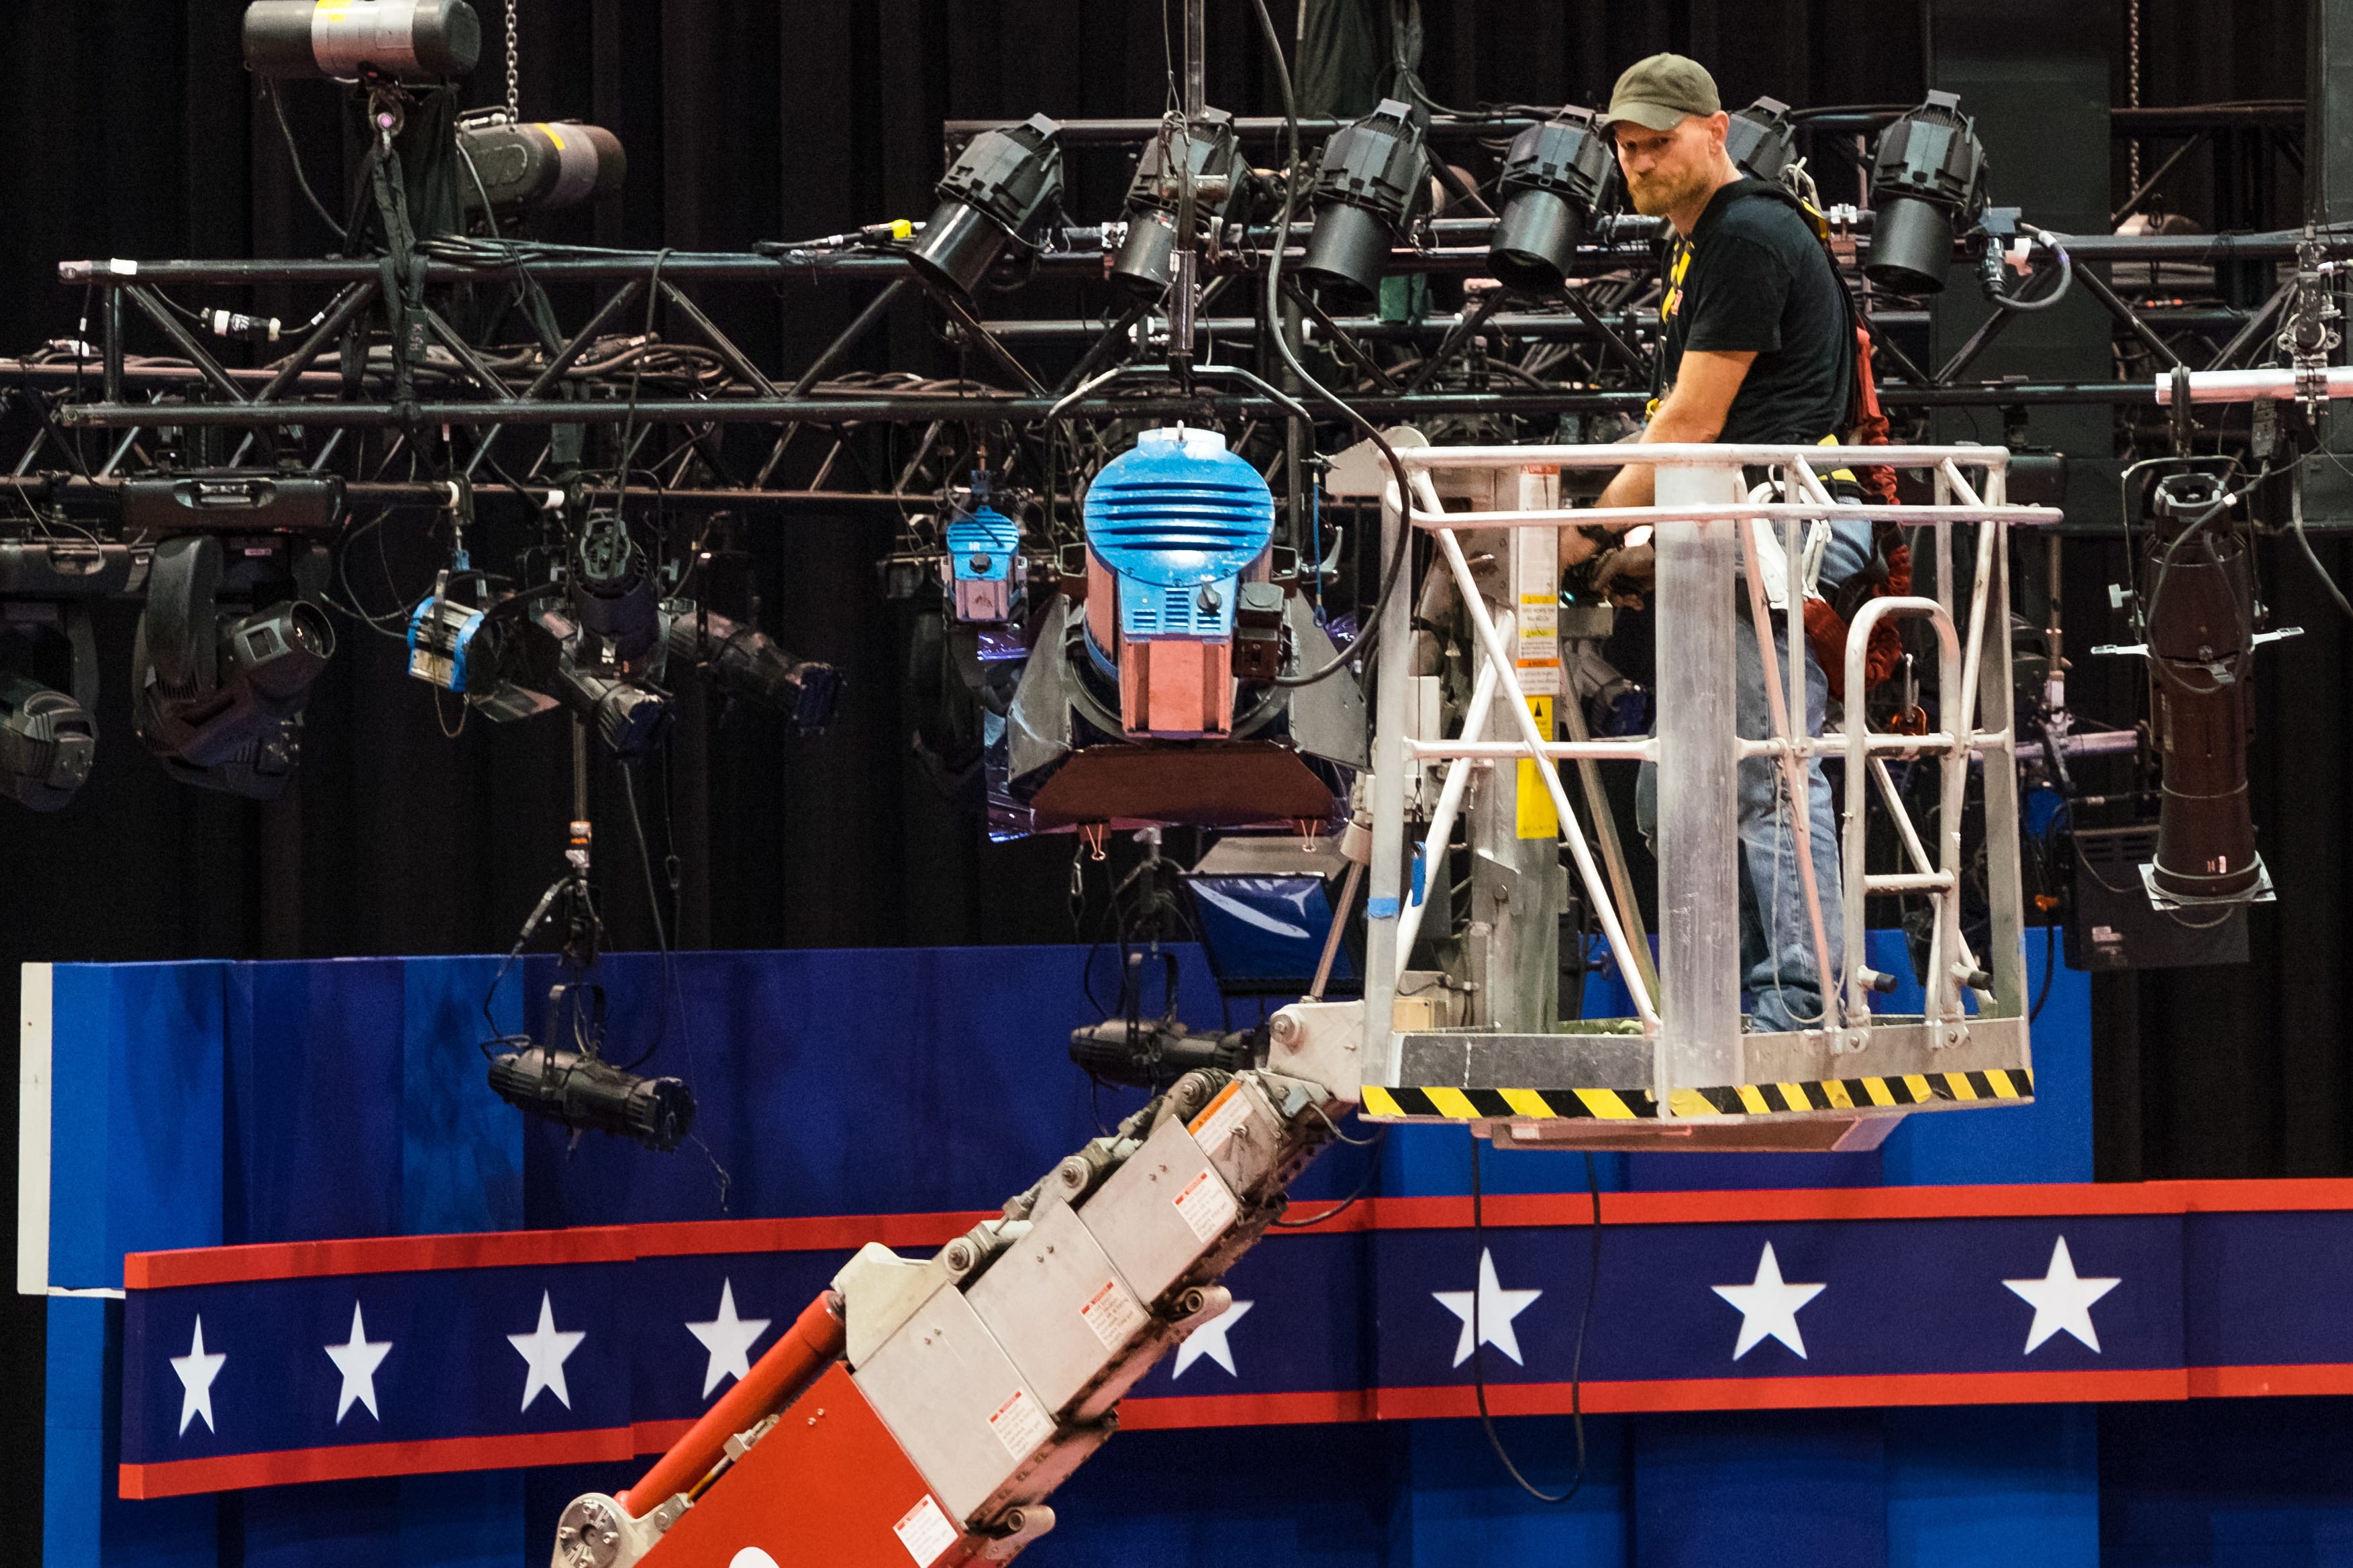 A technician examines the lighting grid as preparations continue for Monday's first debate presidential between Democratic Hillary Clinton and Republican Donald Trump, Saturday, Sept. 24, 2016, at Hofstra University in Hempstead, N.Y.  (AP Photo/J.